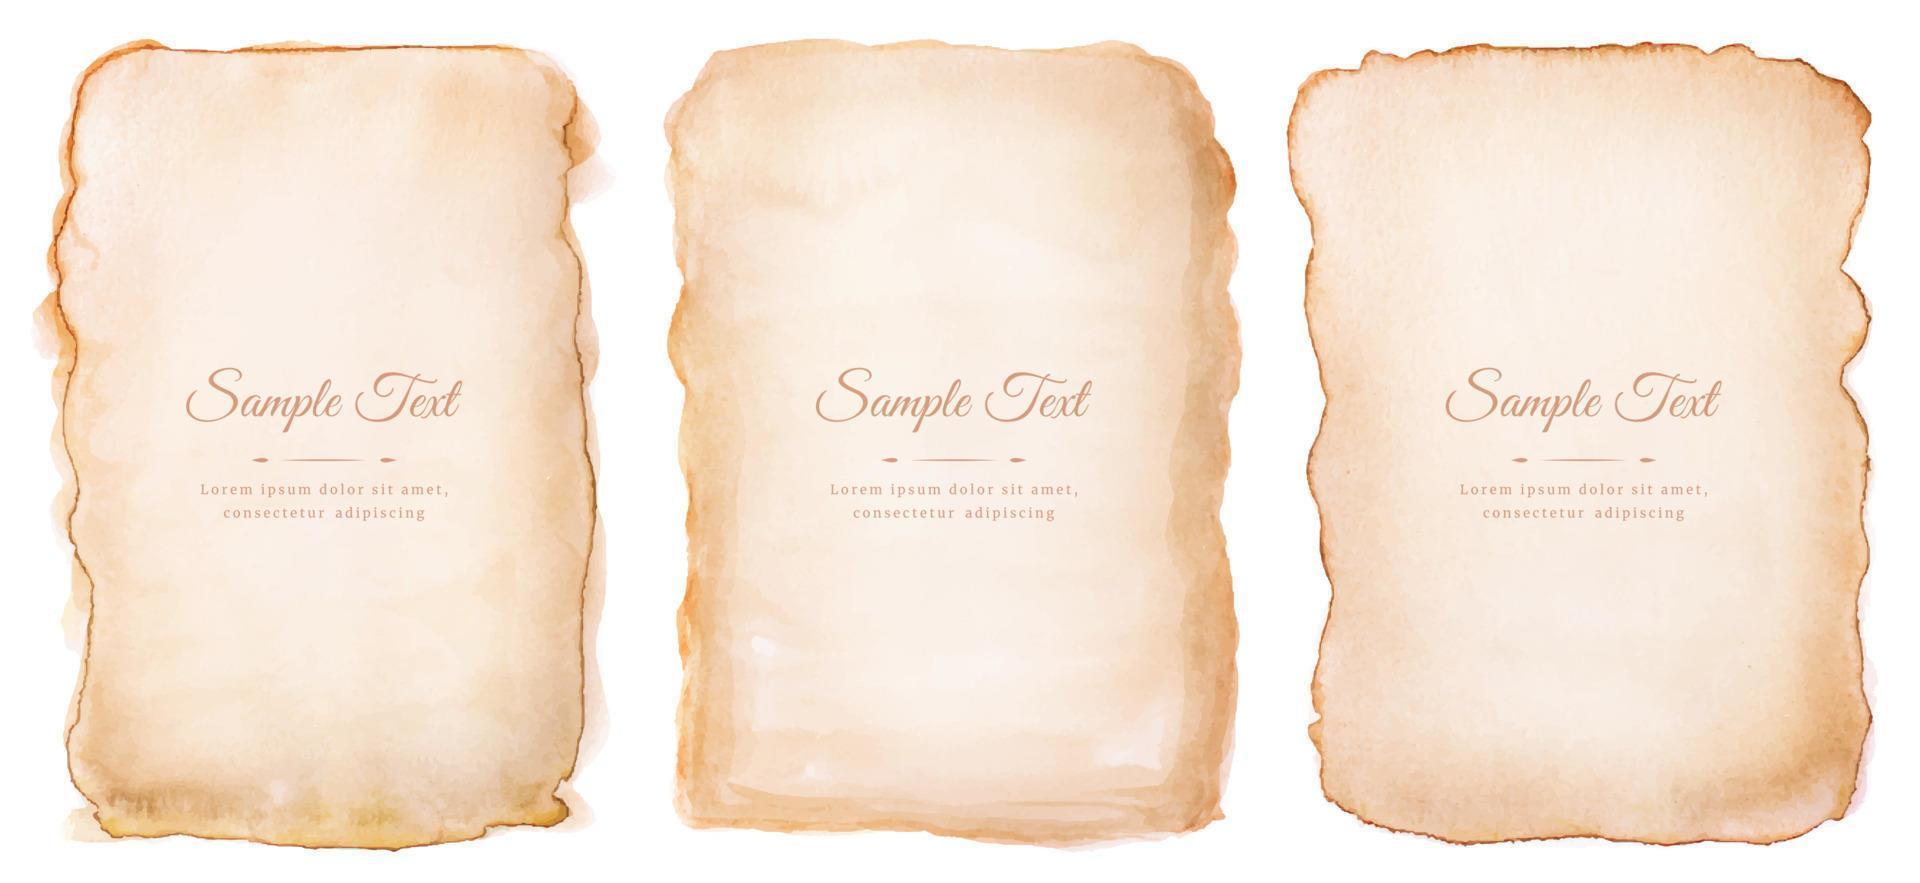 watercolor with a hand drawn in the paper old parchment sheet vintage aged or texture isolated on white background vector